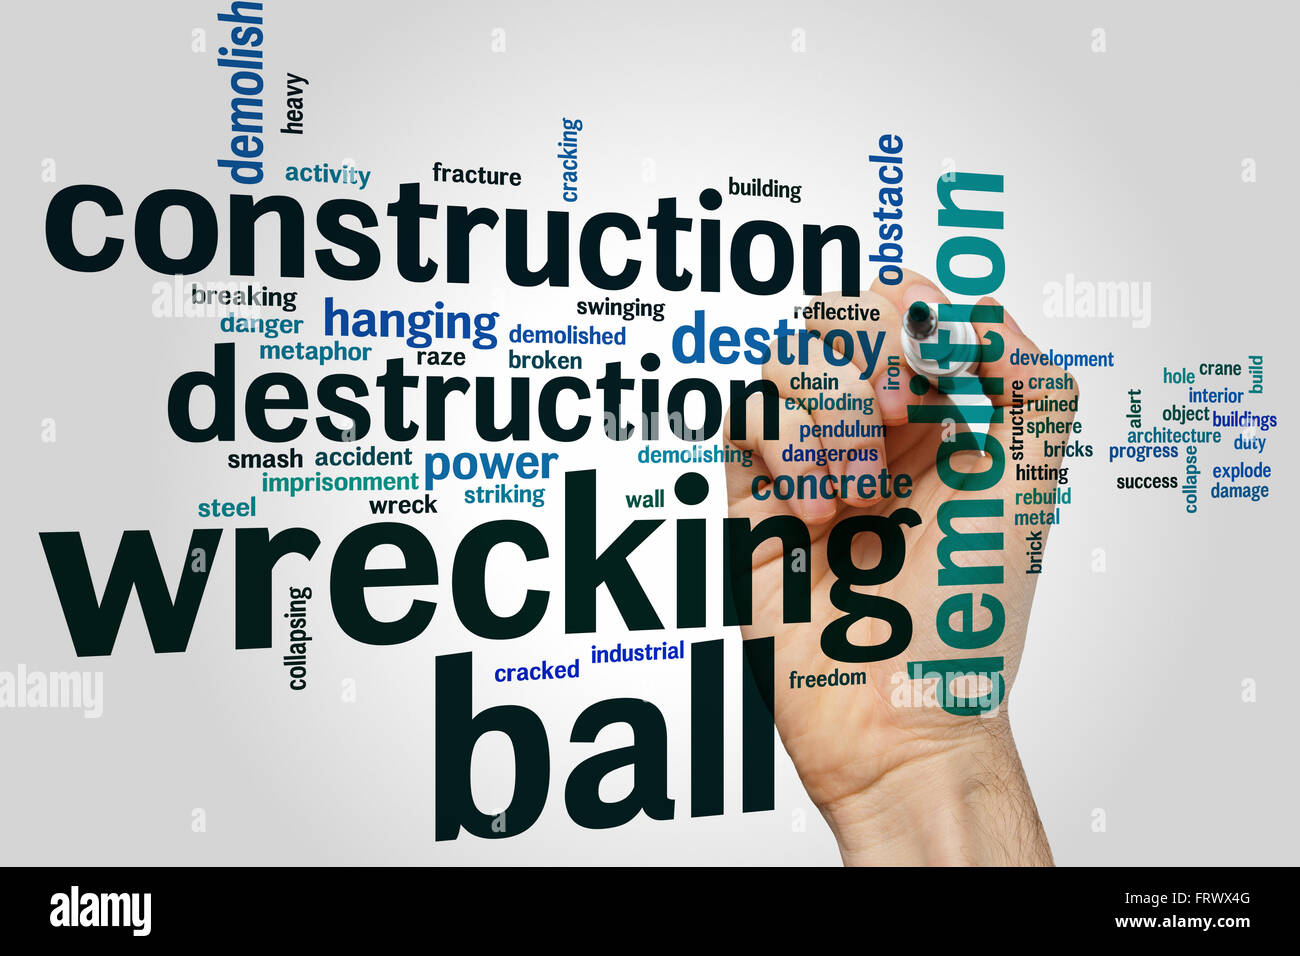 Wrecking ball concept word cloud background Stock Photo